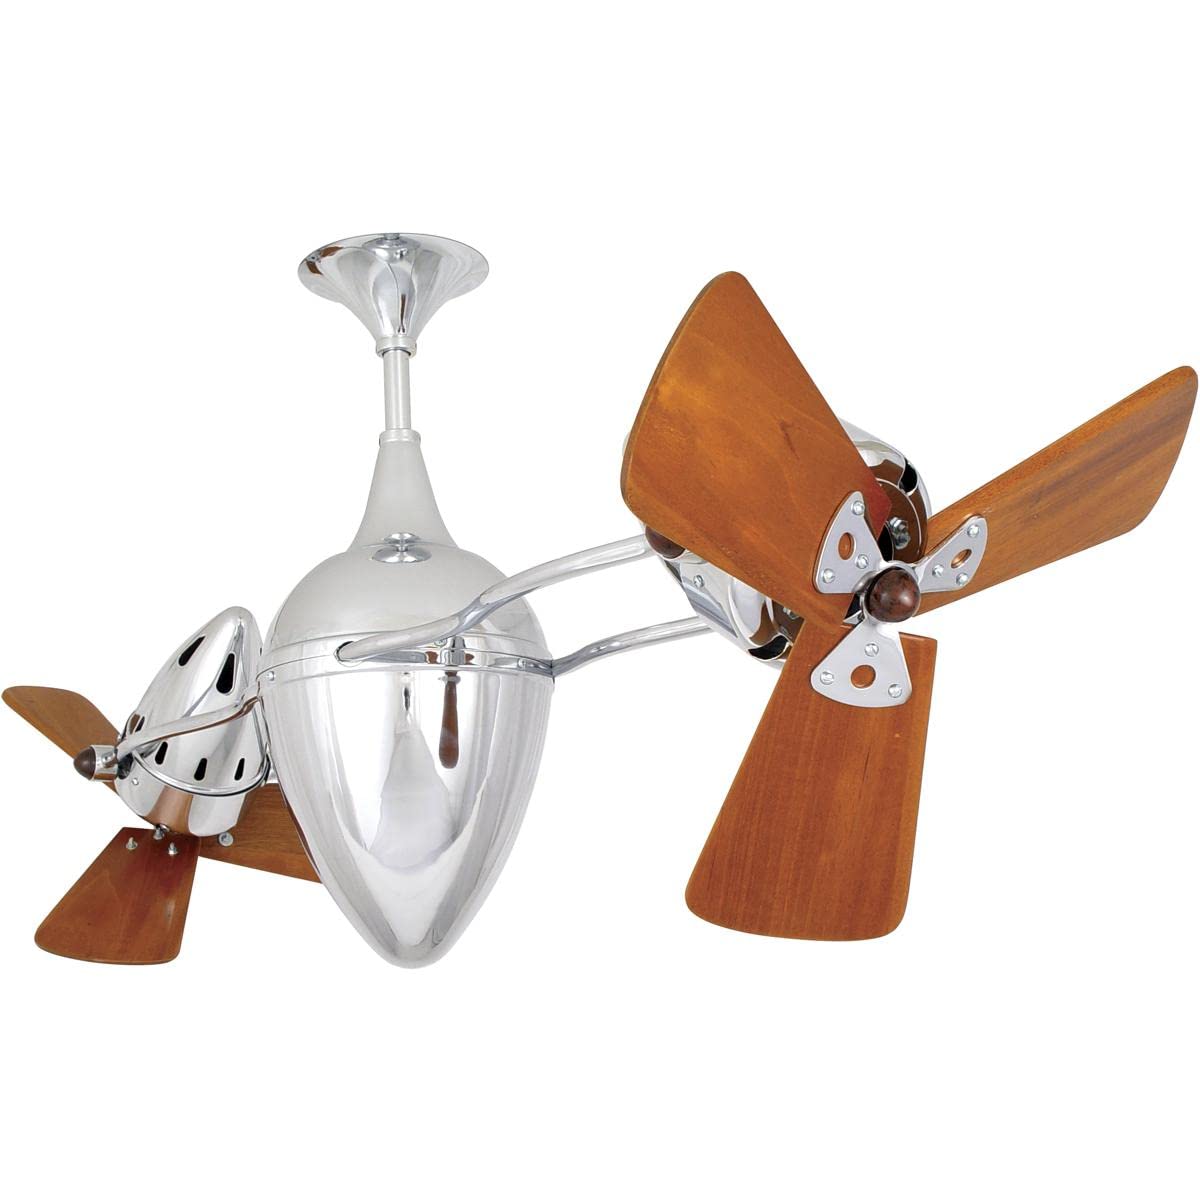 Matthews Fan AR-CR-WD-DAMP Ar Ruthiane 360° dual headed rotational ceiling fan in polished chrome finish with solid sustainable mahogany wood blades for damp location.